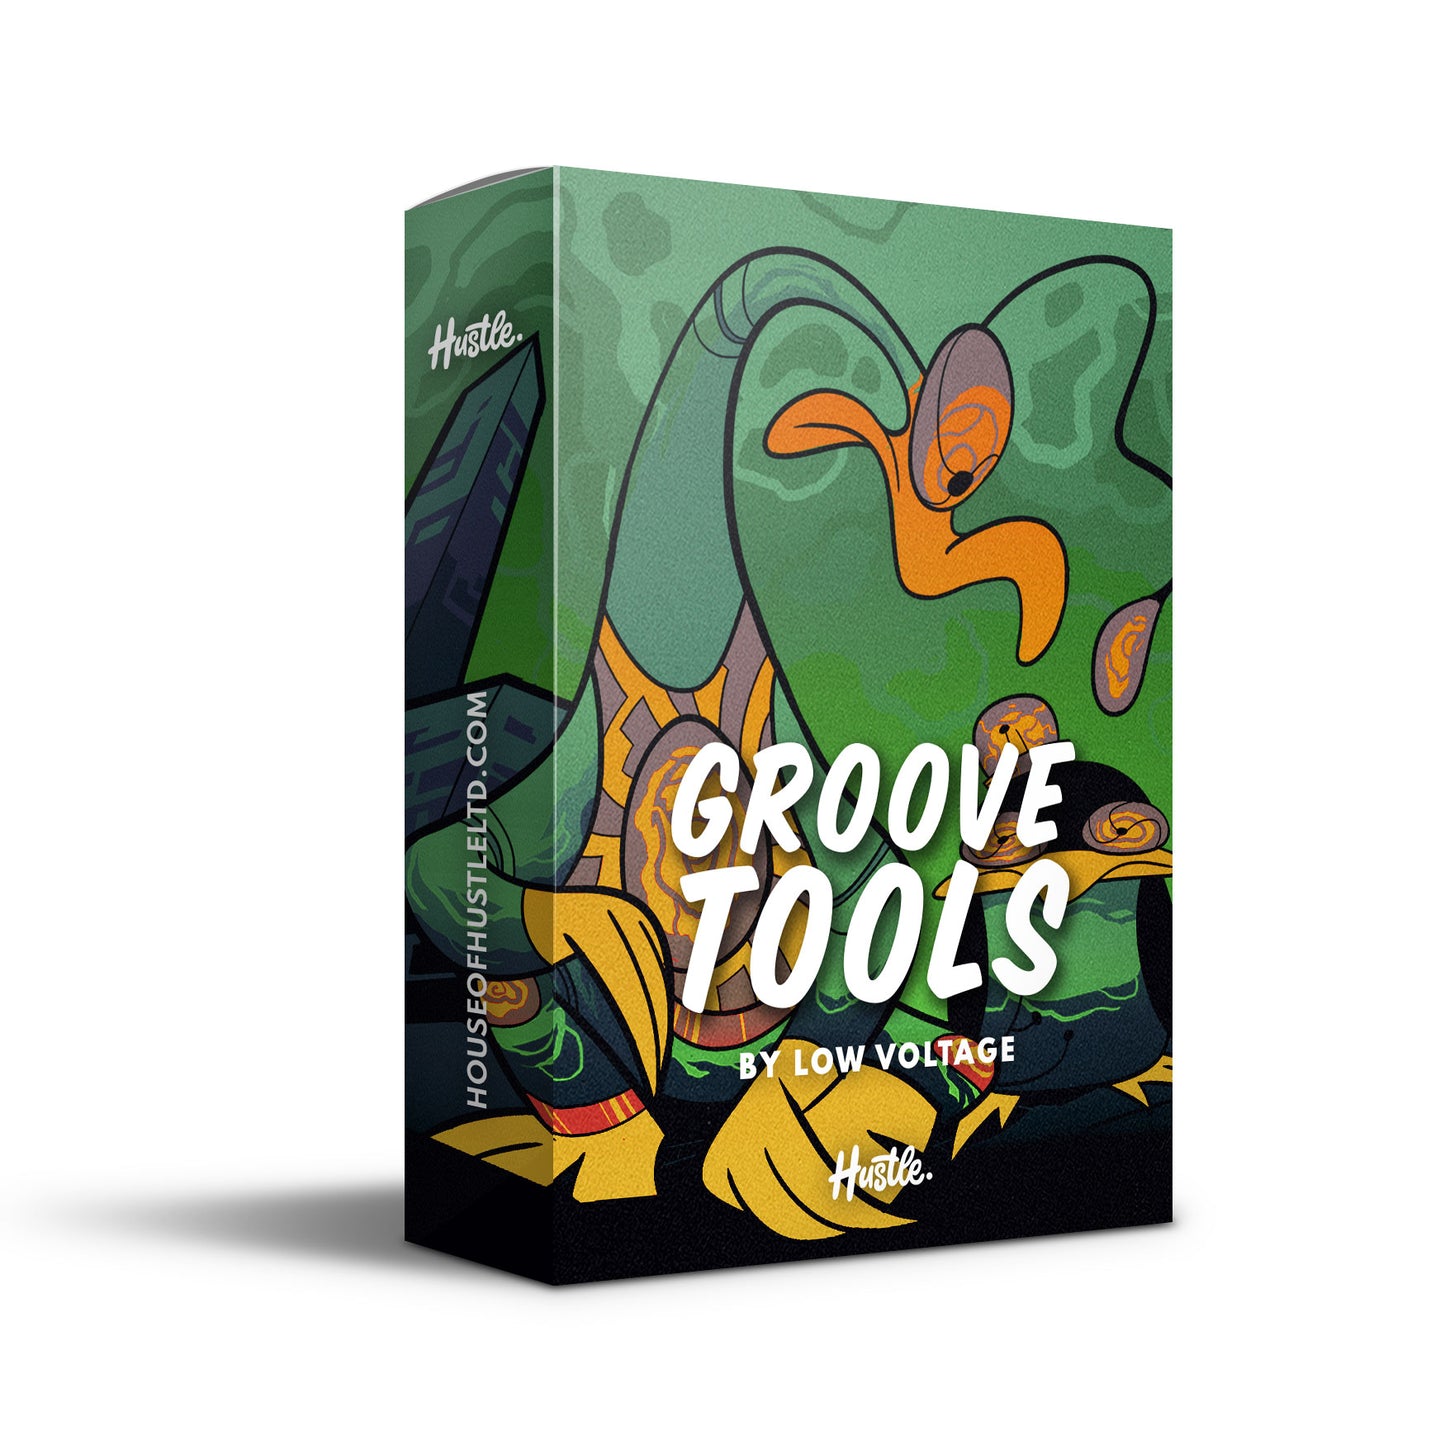 Groove Tools by Low Voltage